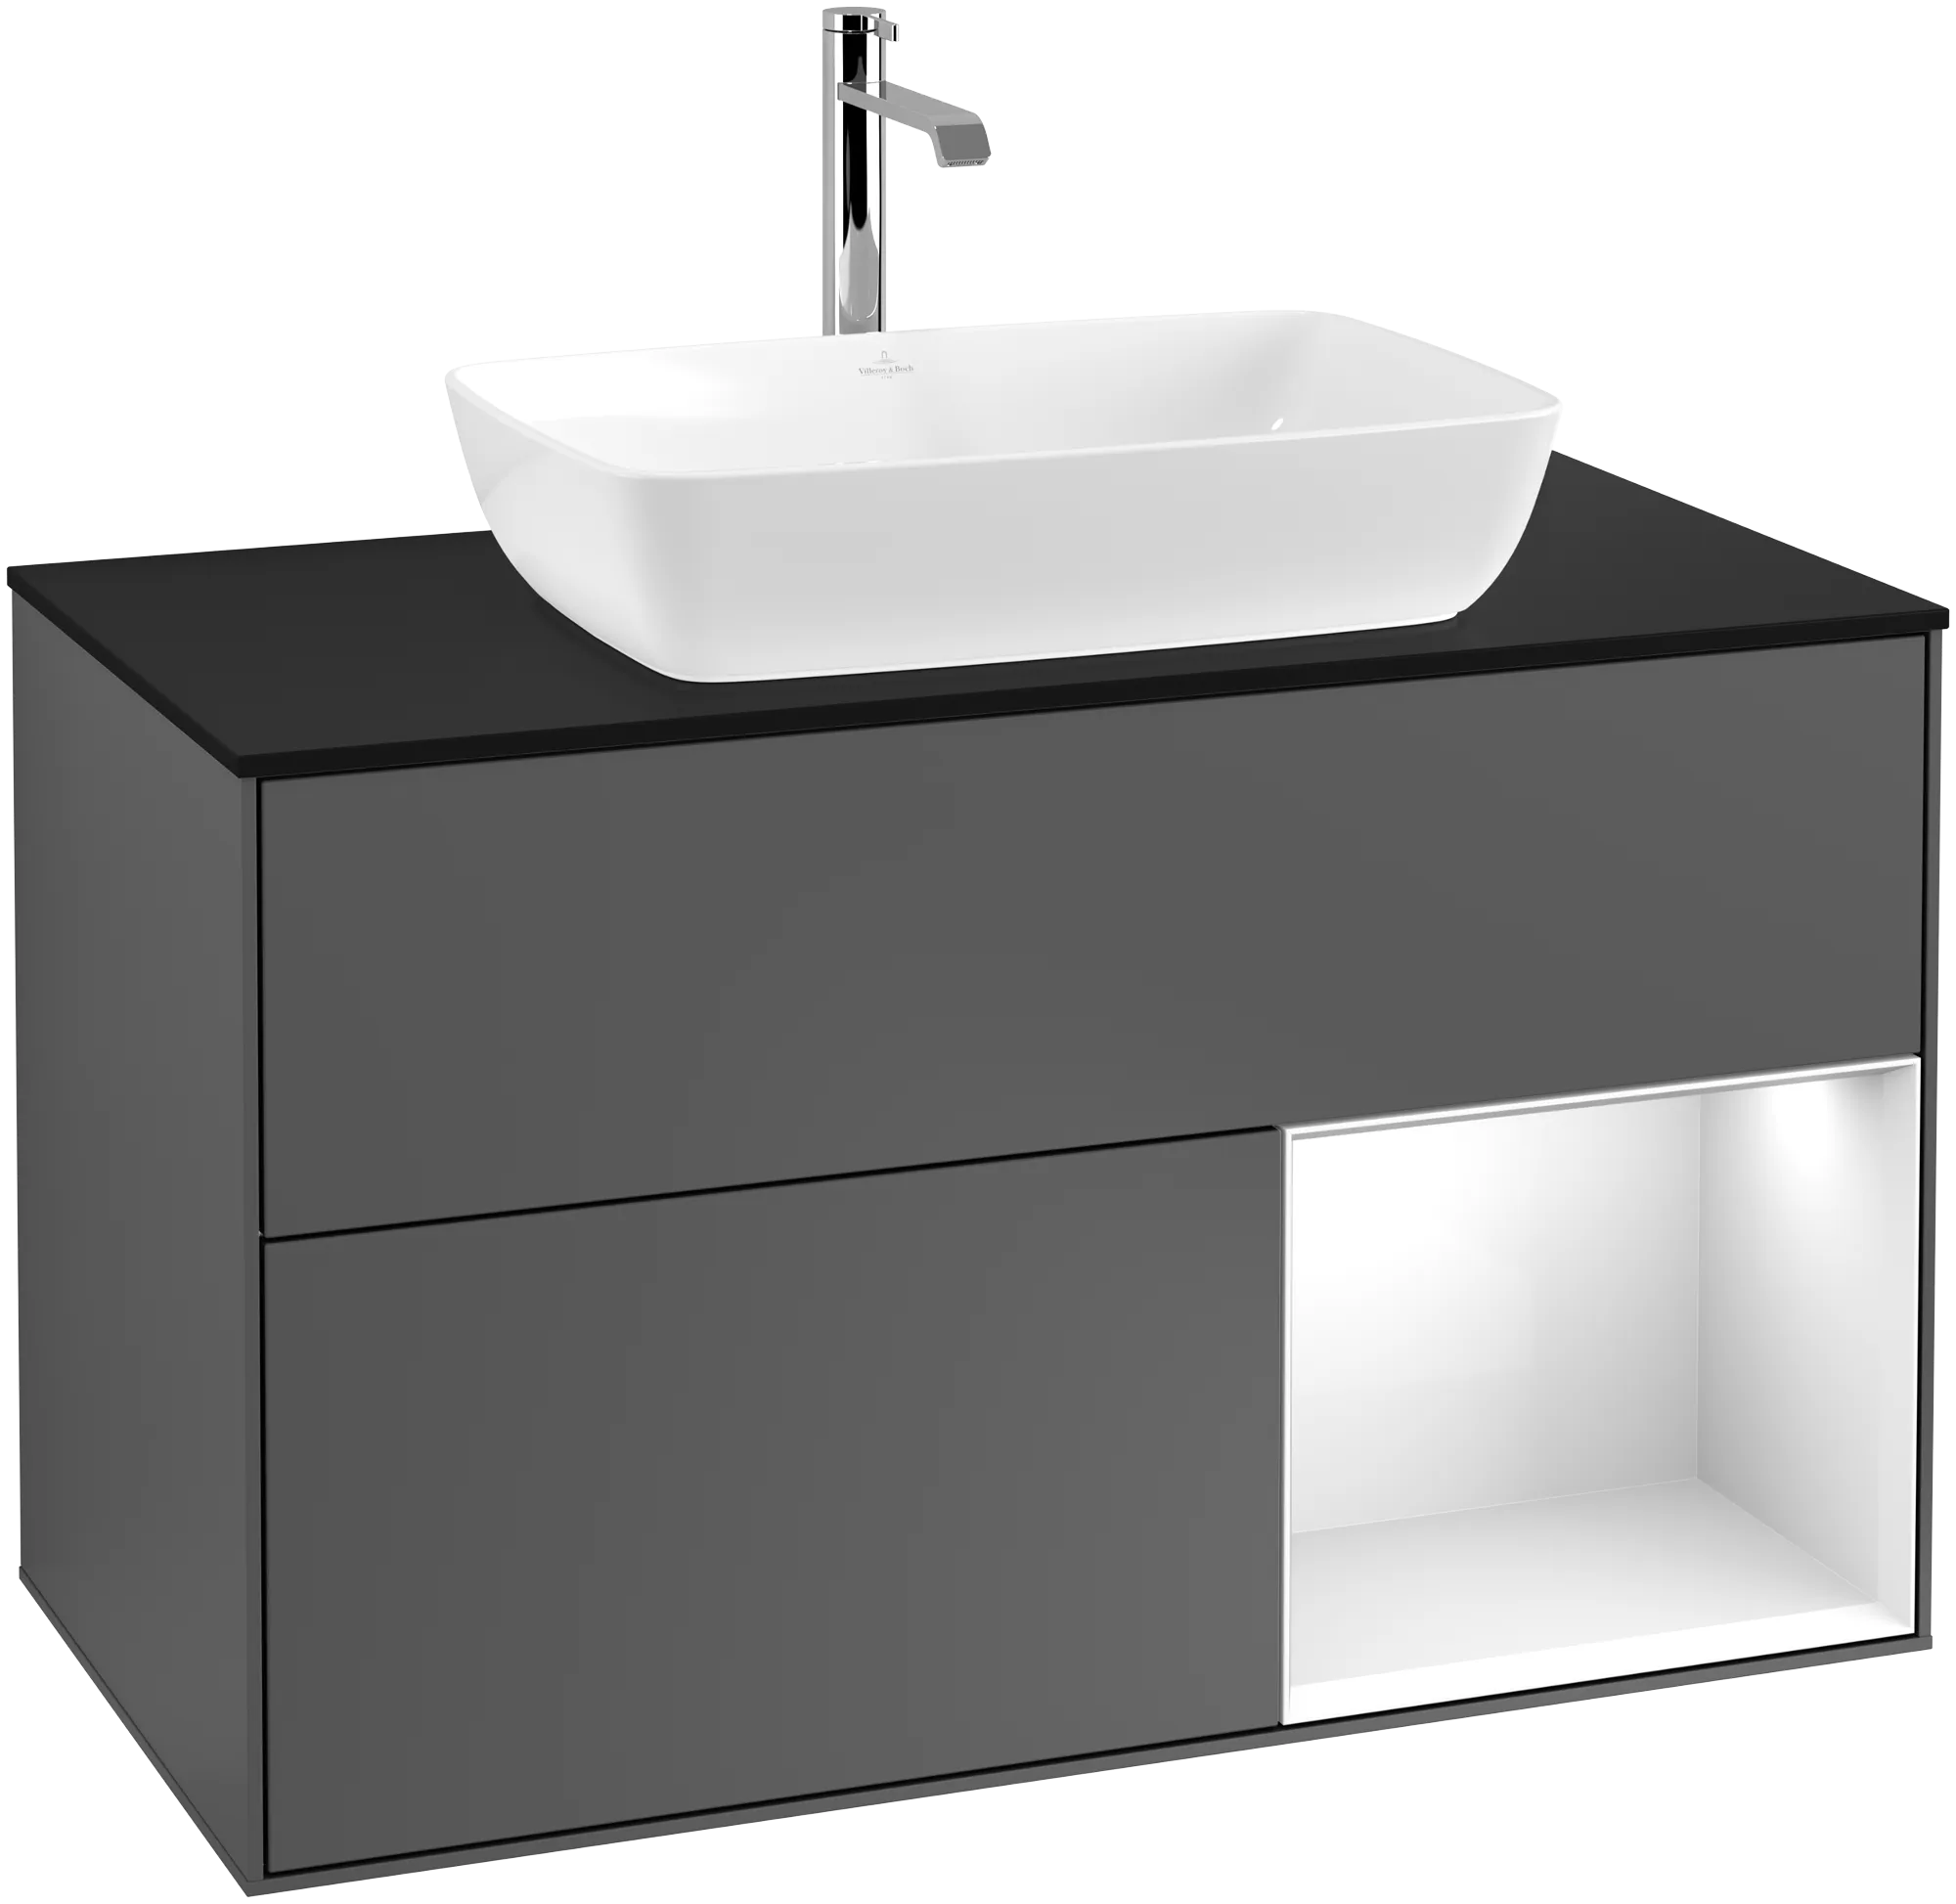 Picture of VILLEROY BOCH Finion Vanity unit, with lighting, 2 pull-out compartments, 1000 x 603 x 501 mm, Anthracite Matt Lacquer / Glossy White Lacquer / Glass Black Matt #G782GFGK